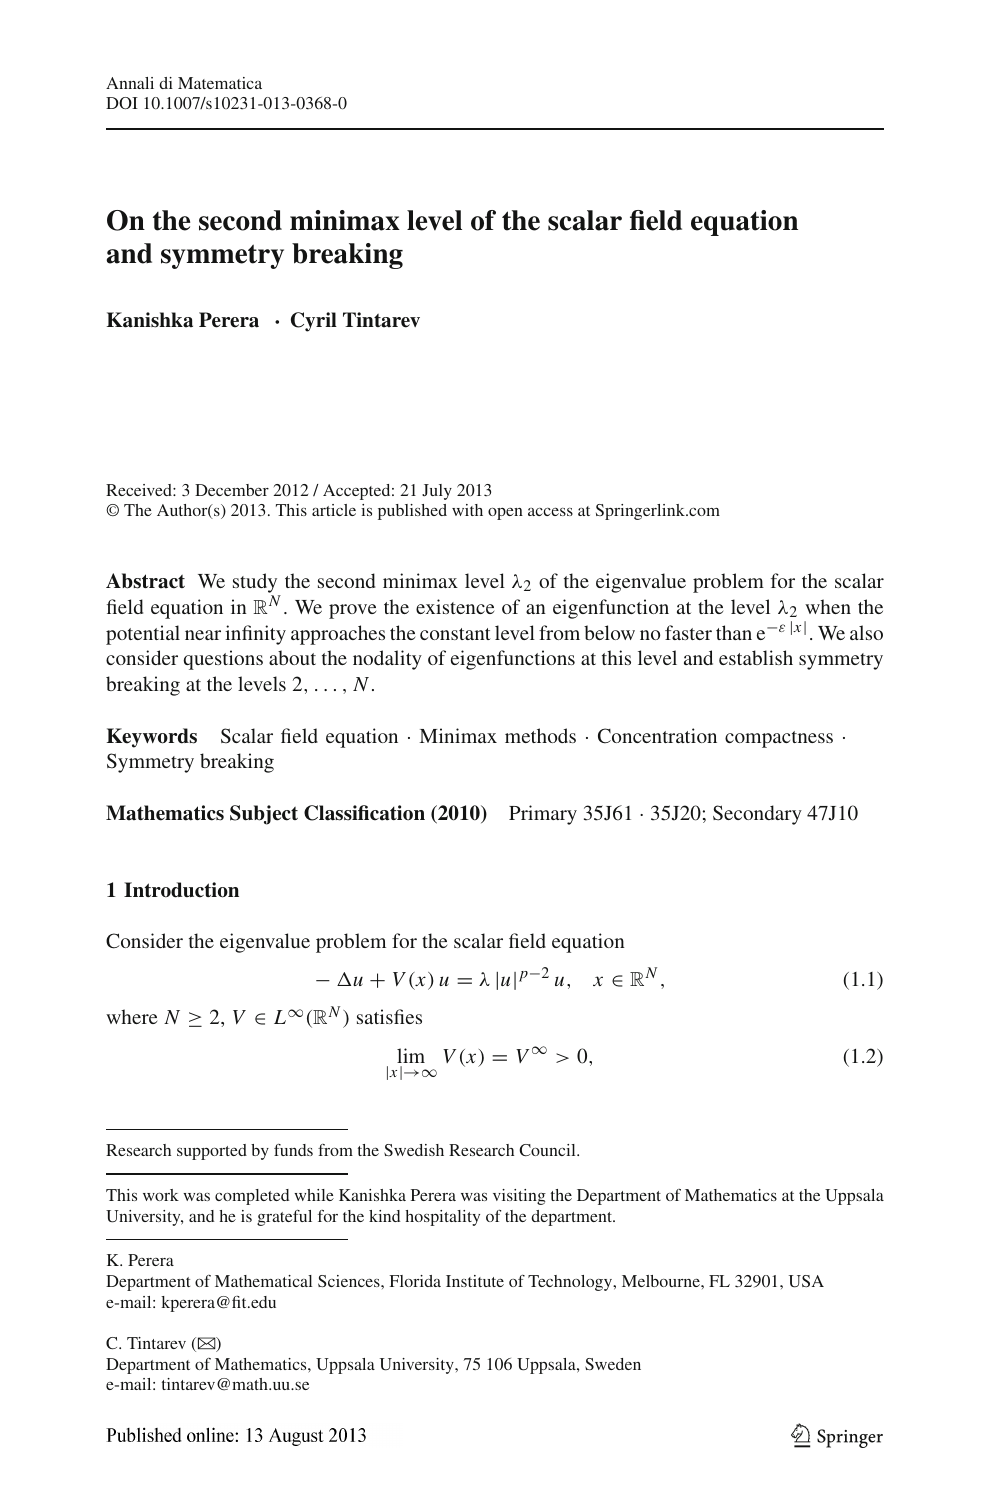 On The Second Minimax Level Of The Scalar Field Equation And Symmetry Breaking Topic Of Research Paper In Mathematics Download Scholarly Article Pdf And Read For Free On Cyberleninka Open Science